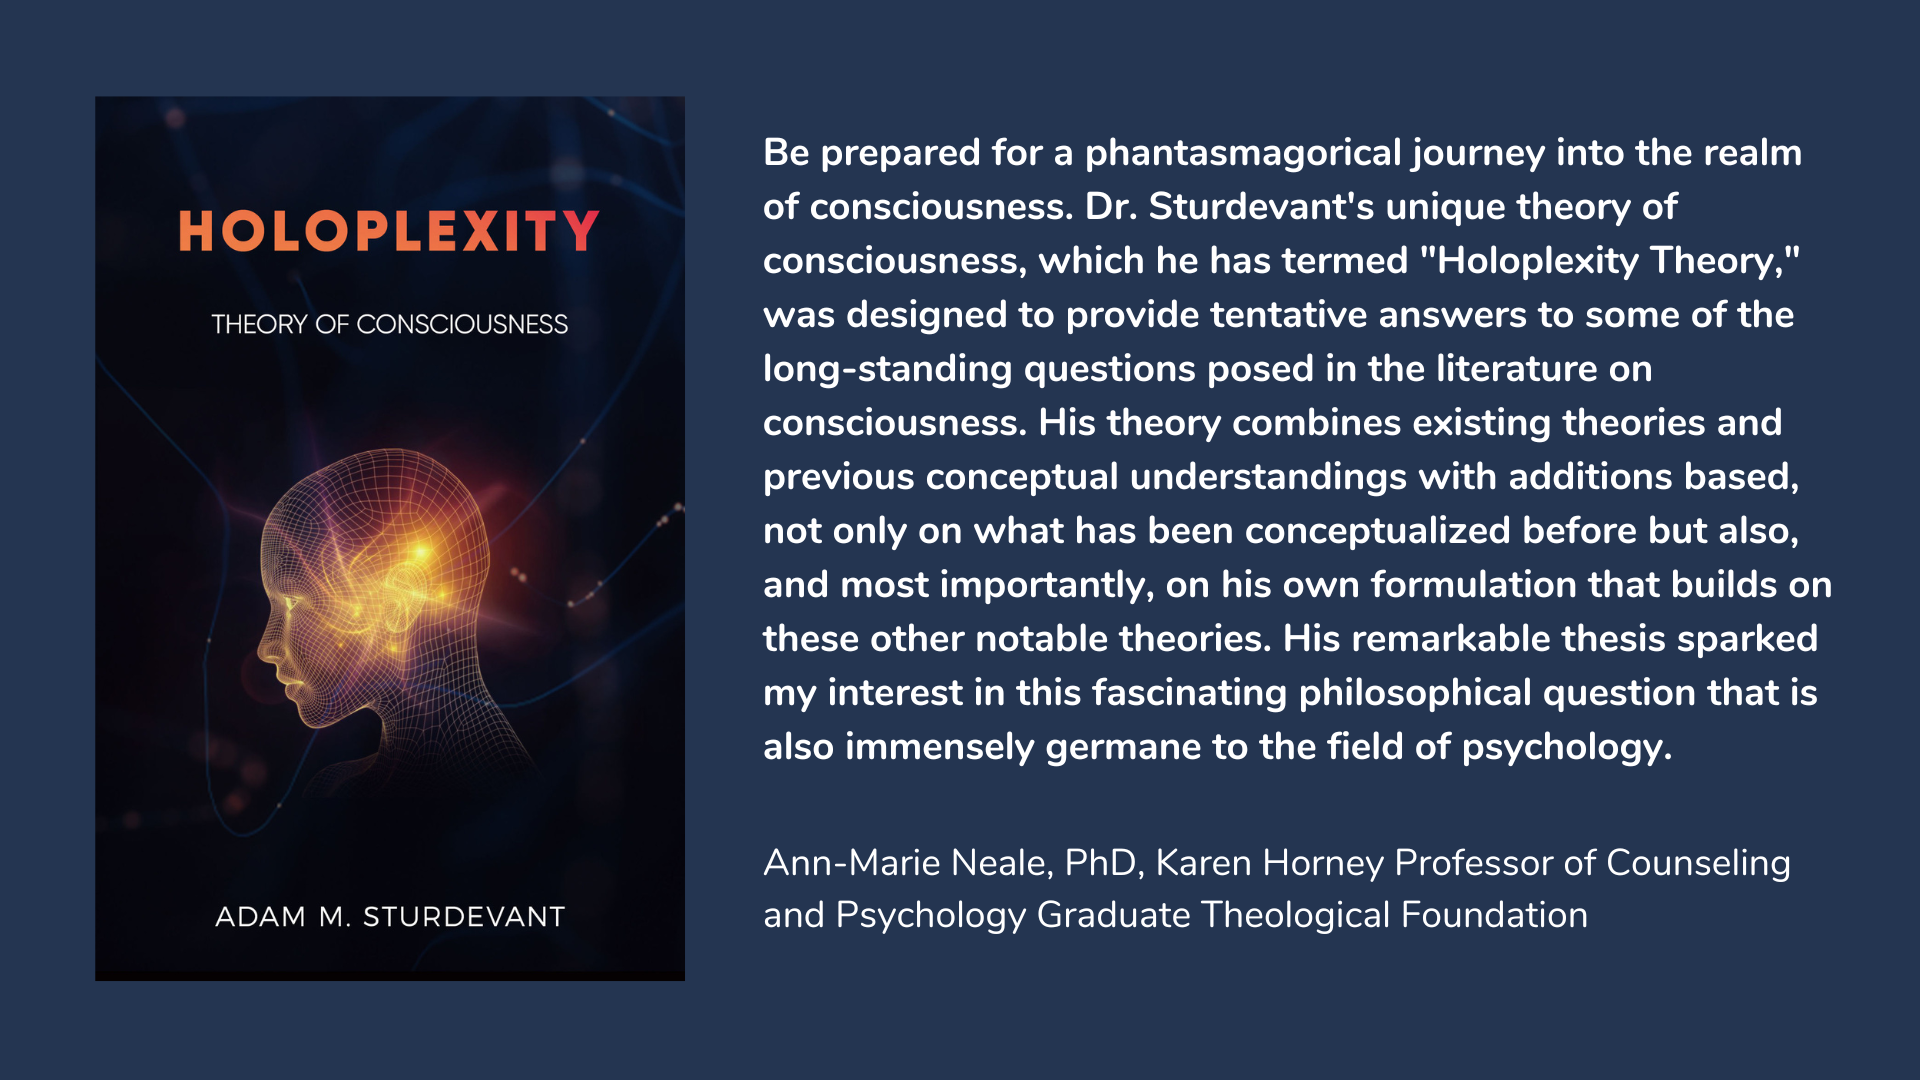 Holoplexity: Theory of Consciousness, book page and description.